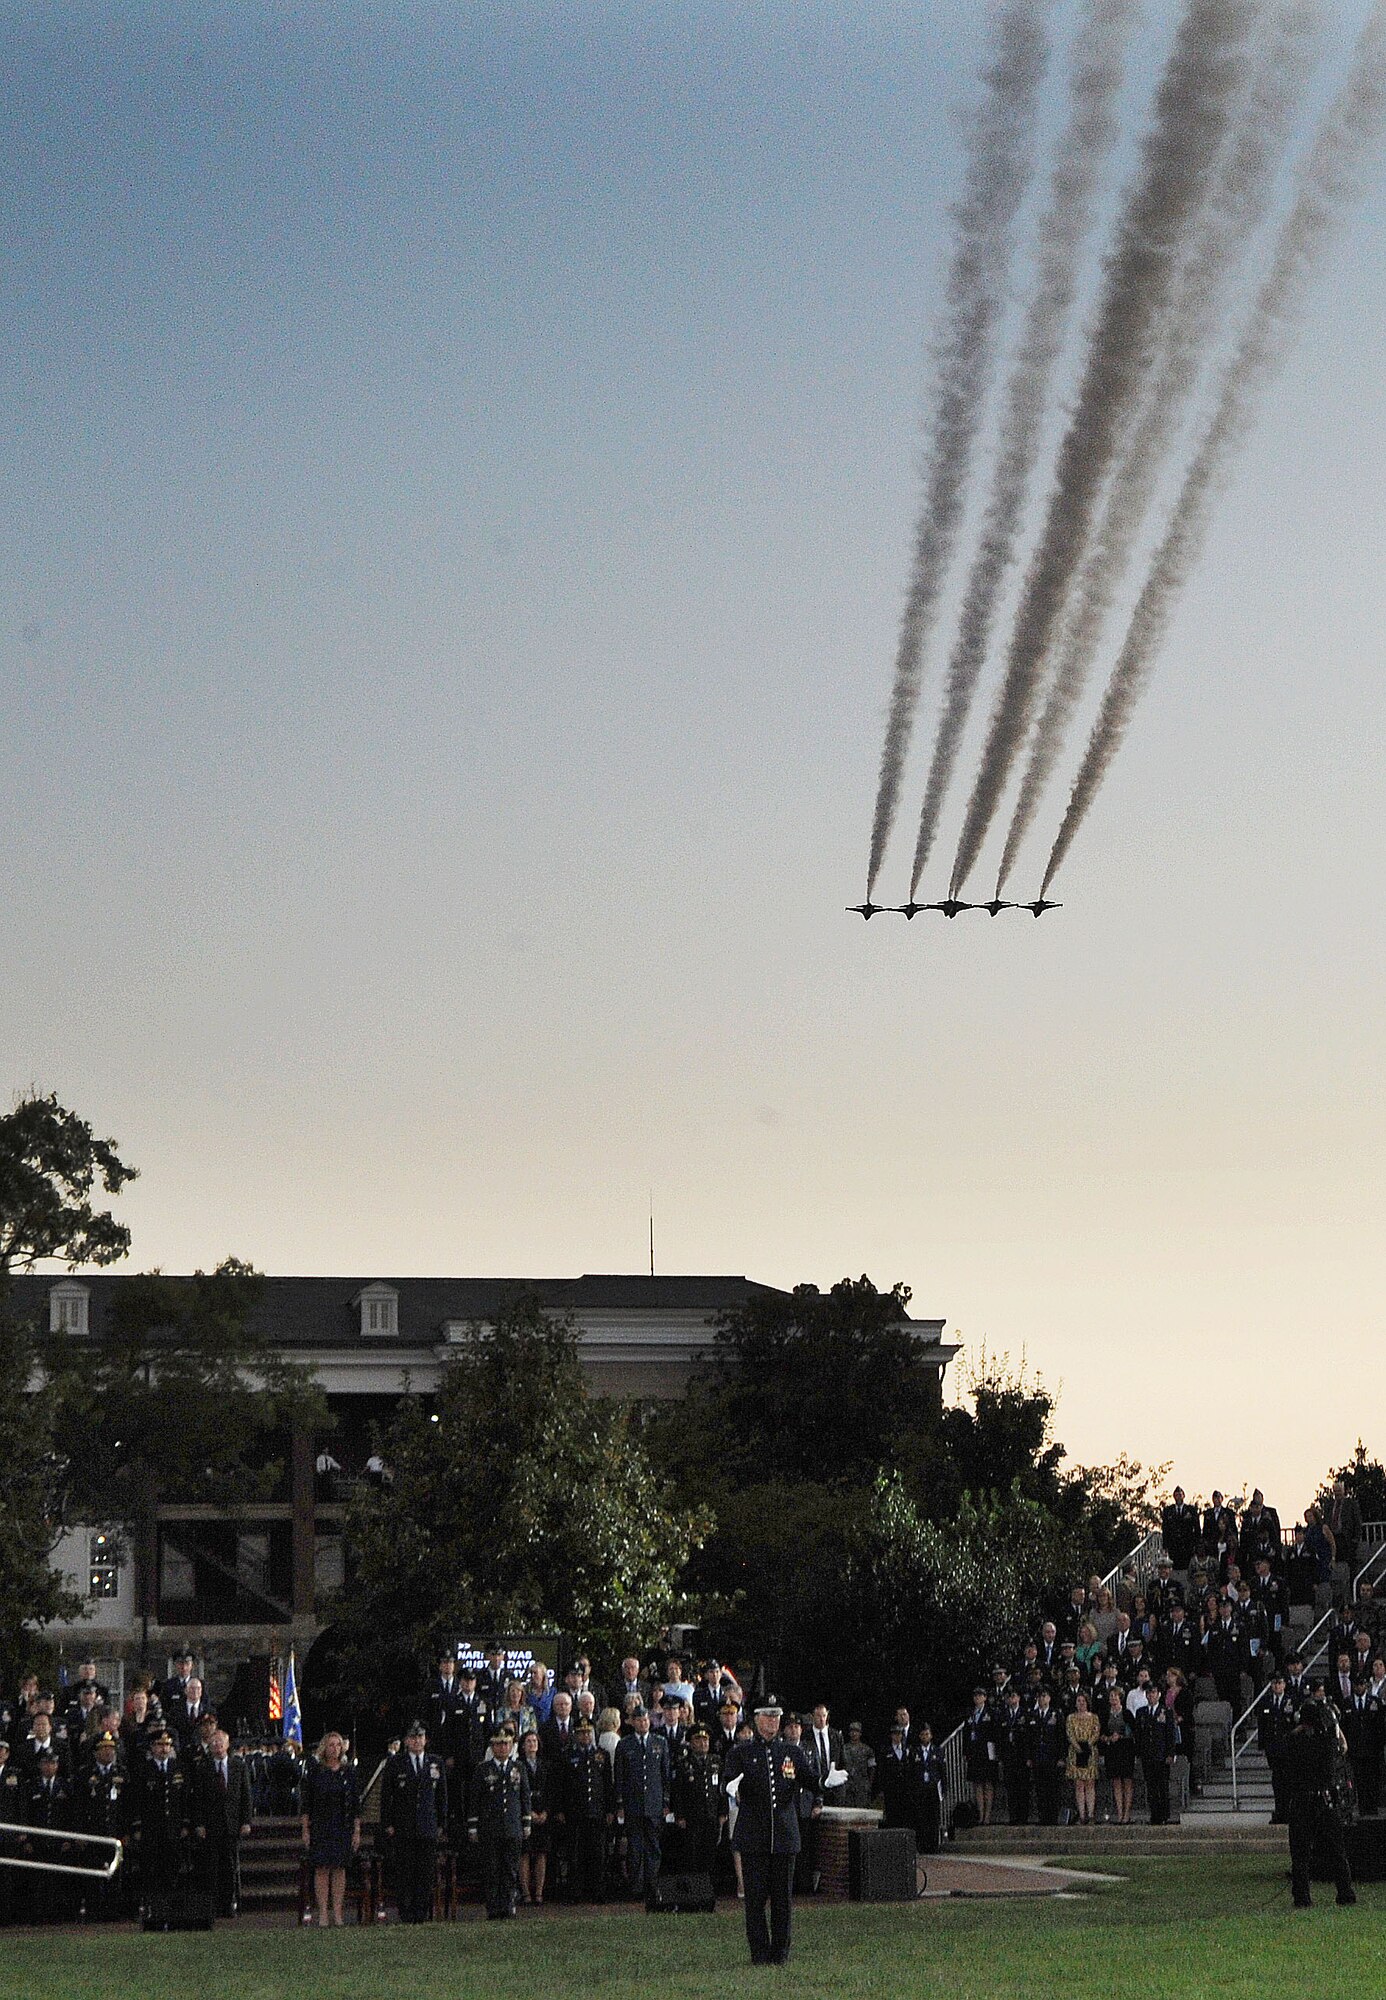 The Air Force Thunderbirds fly over the Ceremonial Lawn at Joint Base Anacostia-Bolling on Sept. 17, 2015. The Air Force District of Washington commemorated the United States Air Force's 68th birthday September 17, 2015 with a celebration of music, drill and ceremony, aircraft, and fireworks. (U.S. Air Force photo/Jim Lotz)